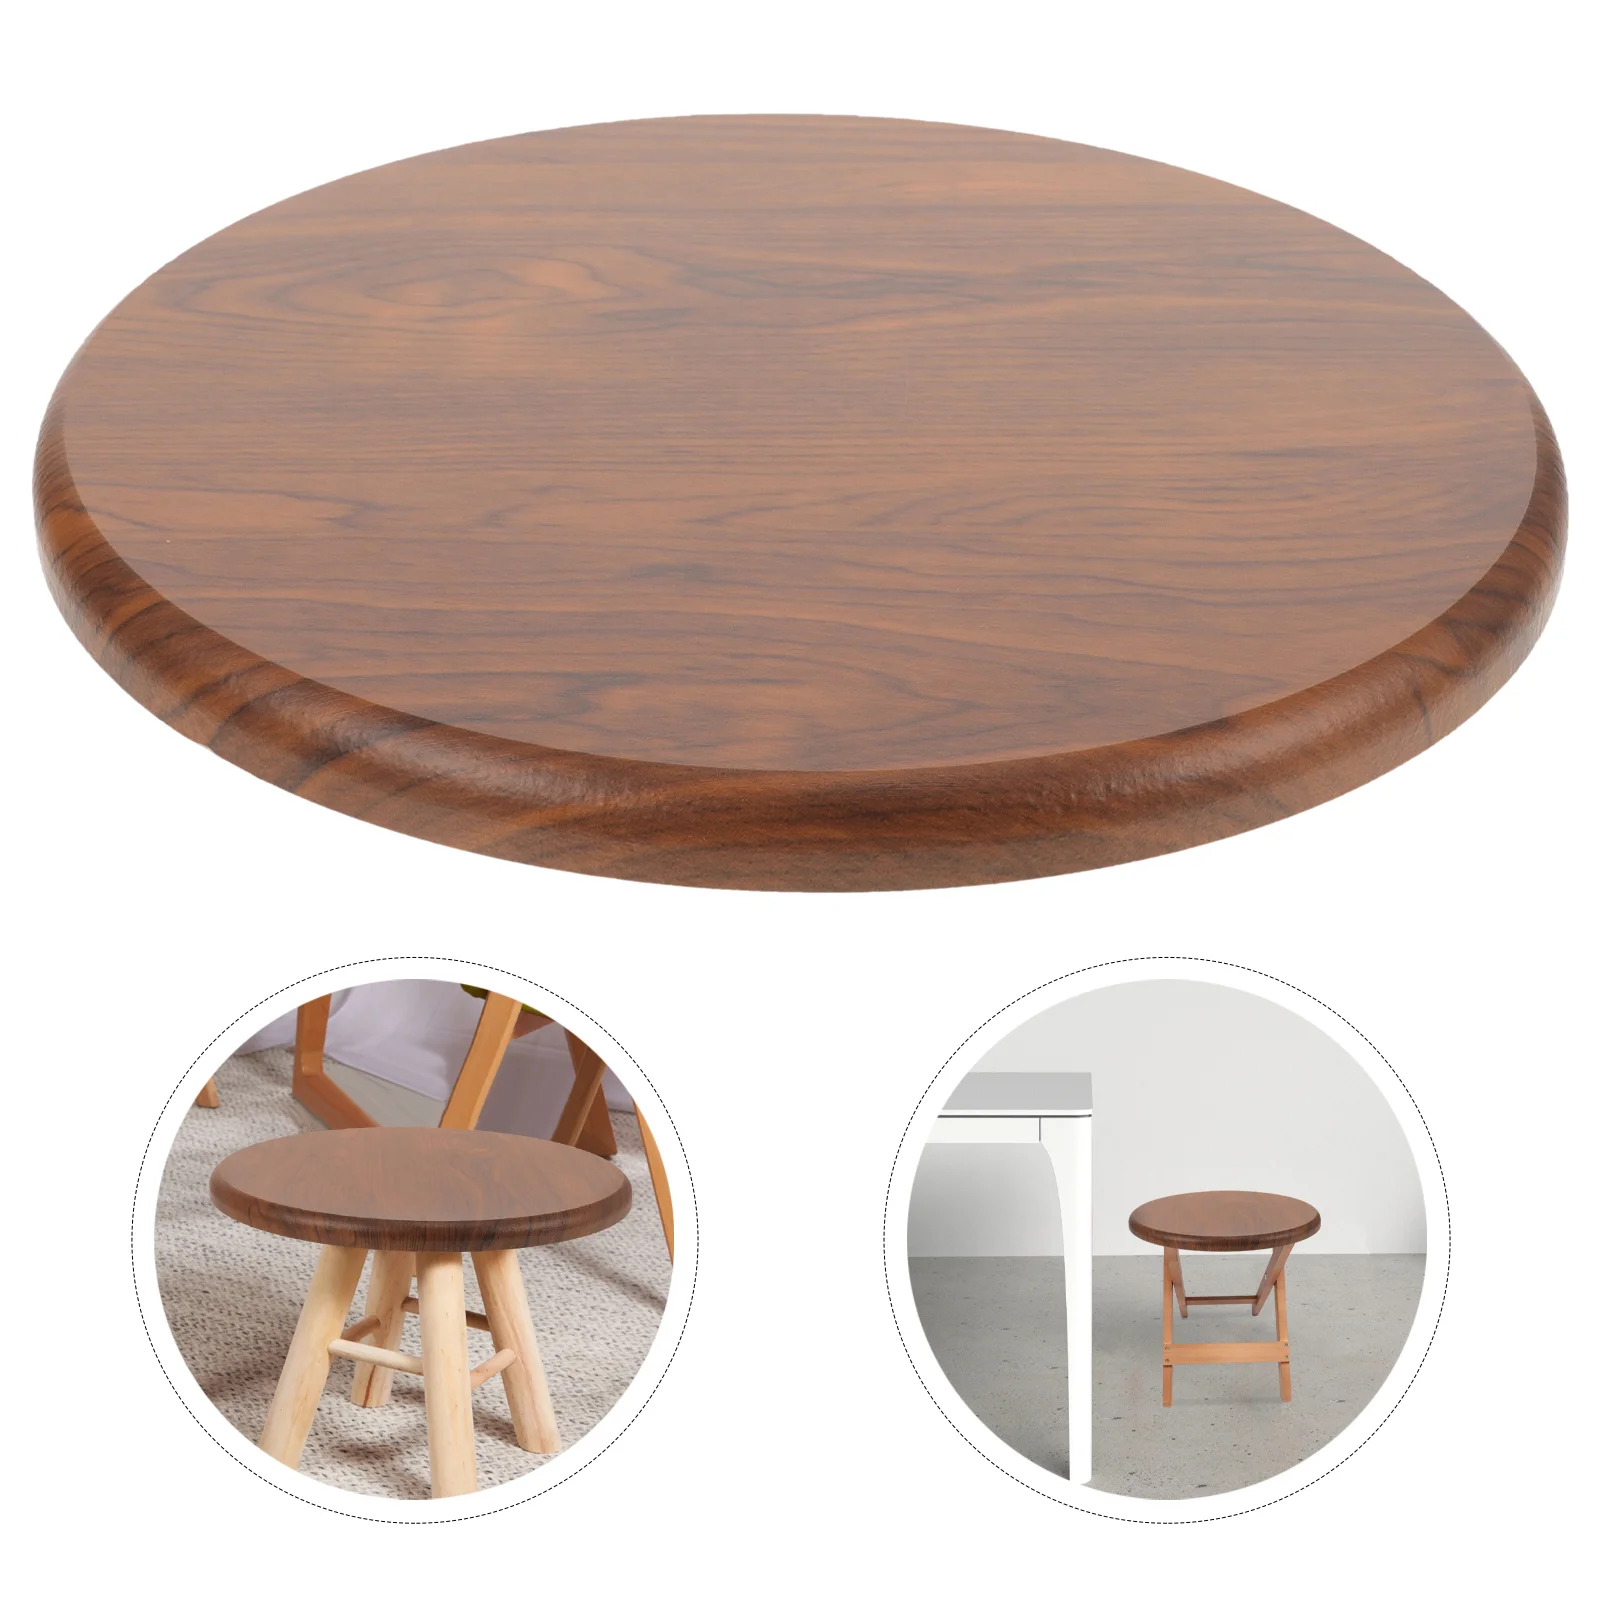 

Round Stool Seat Cover Smooth Wood Stool Surface Replacement Wooden Stool Seat Surface